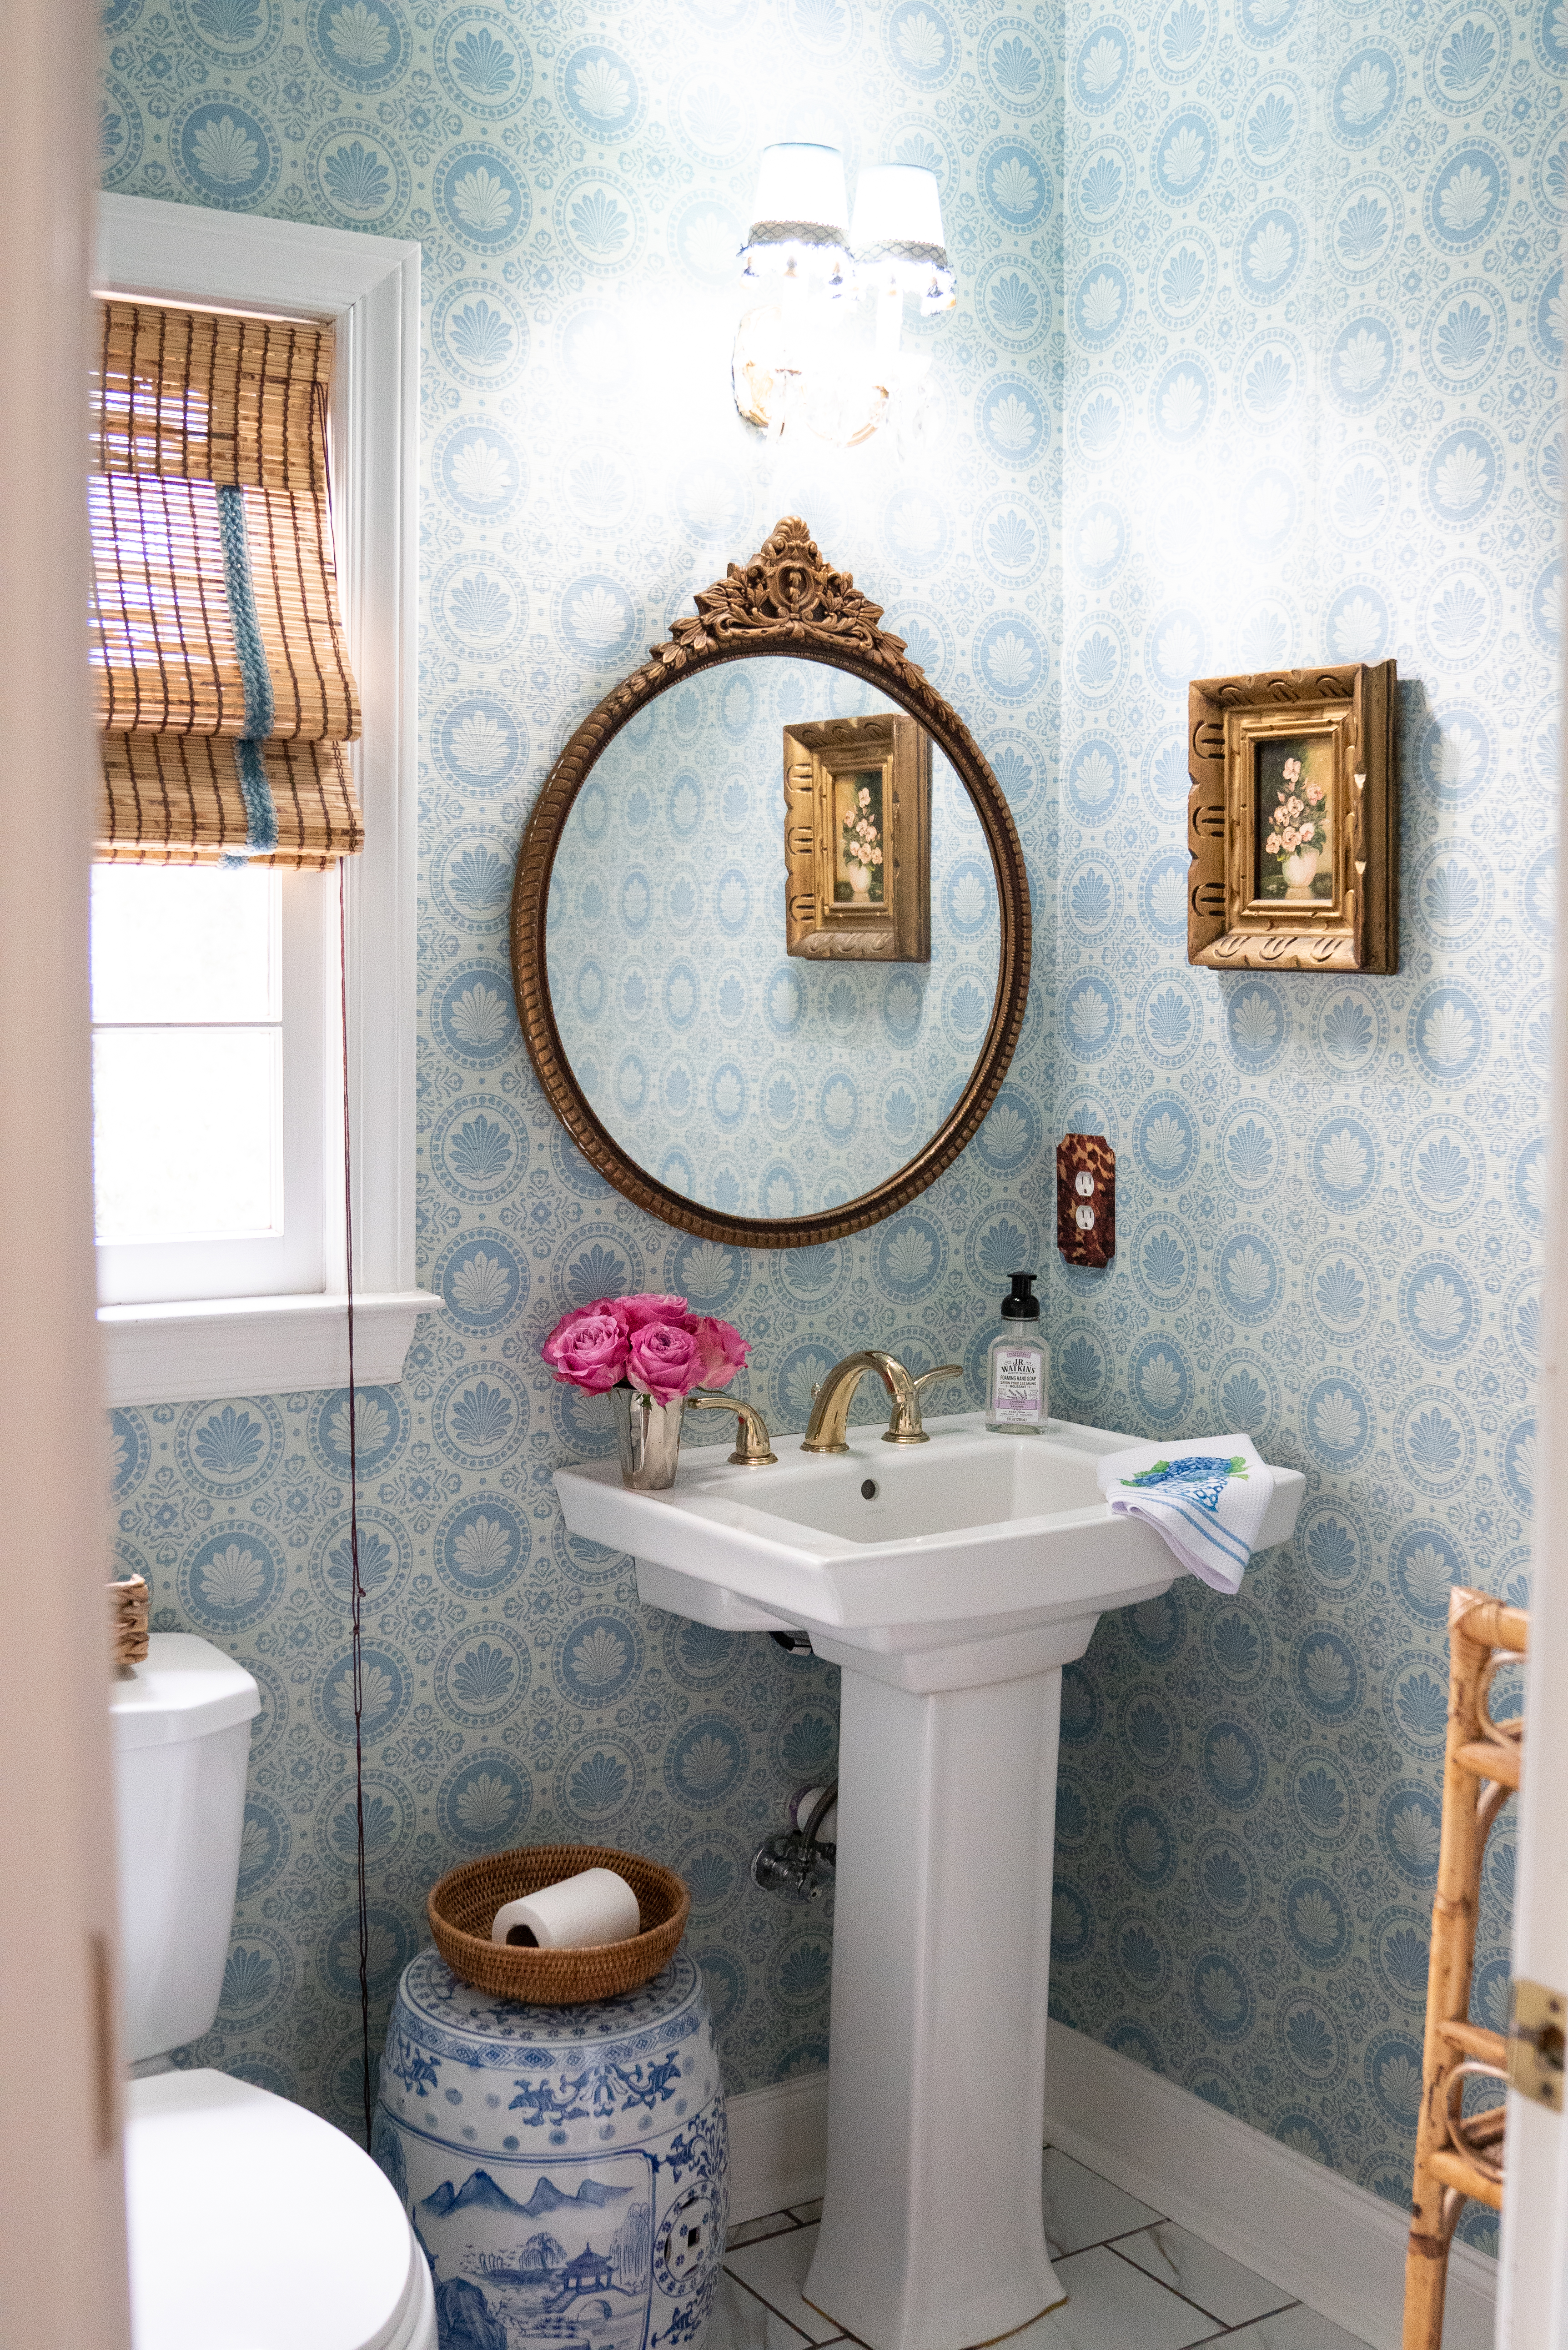 Powder Room Facelift, $26 Wallpaper Edition - Kelly in the City